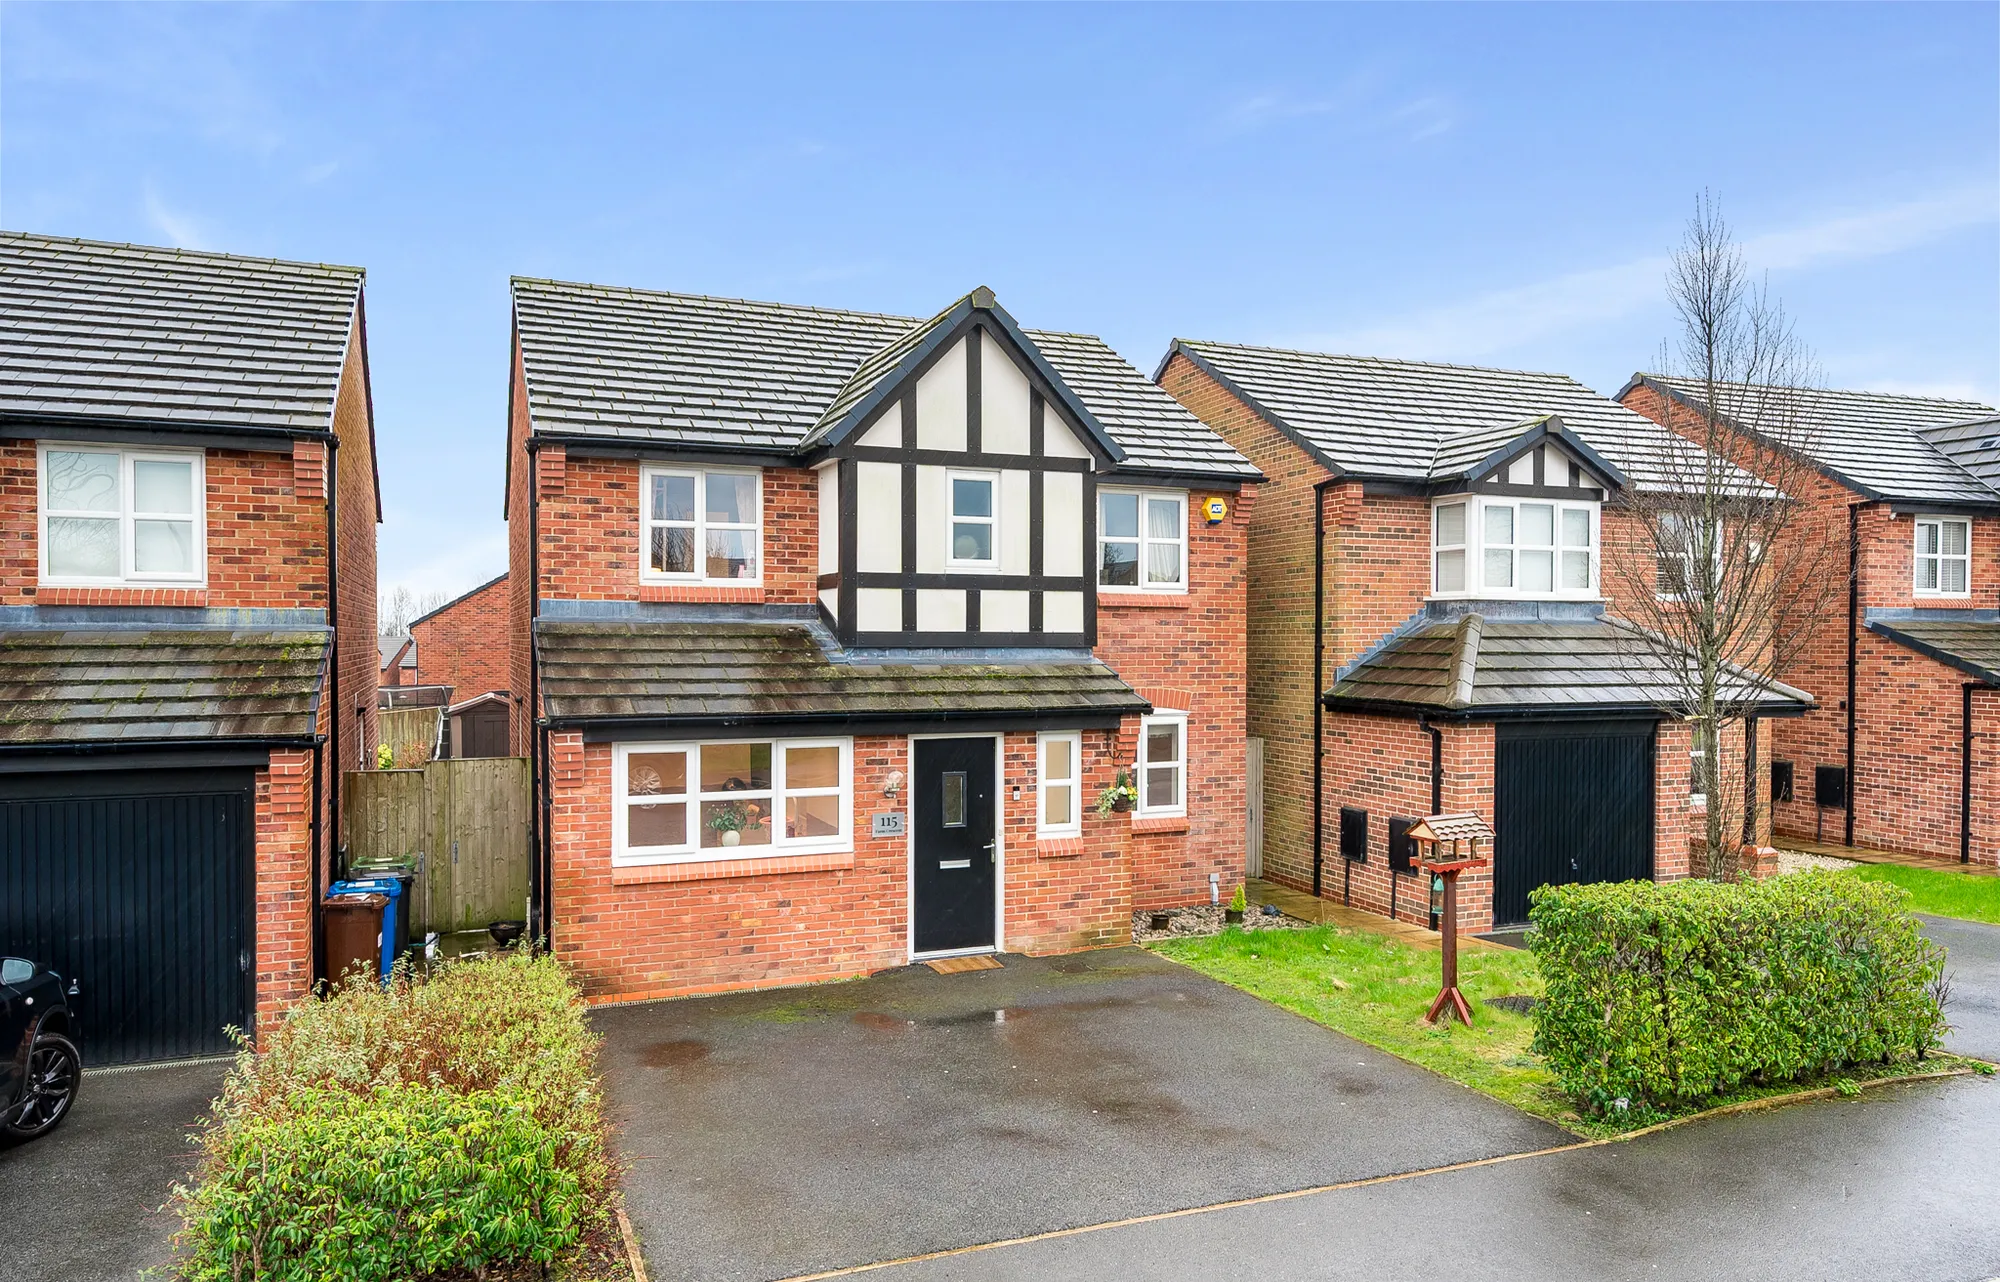 4 bed detached house for sale in Farm Crescent, Manchester - Property Image 1